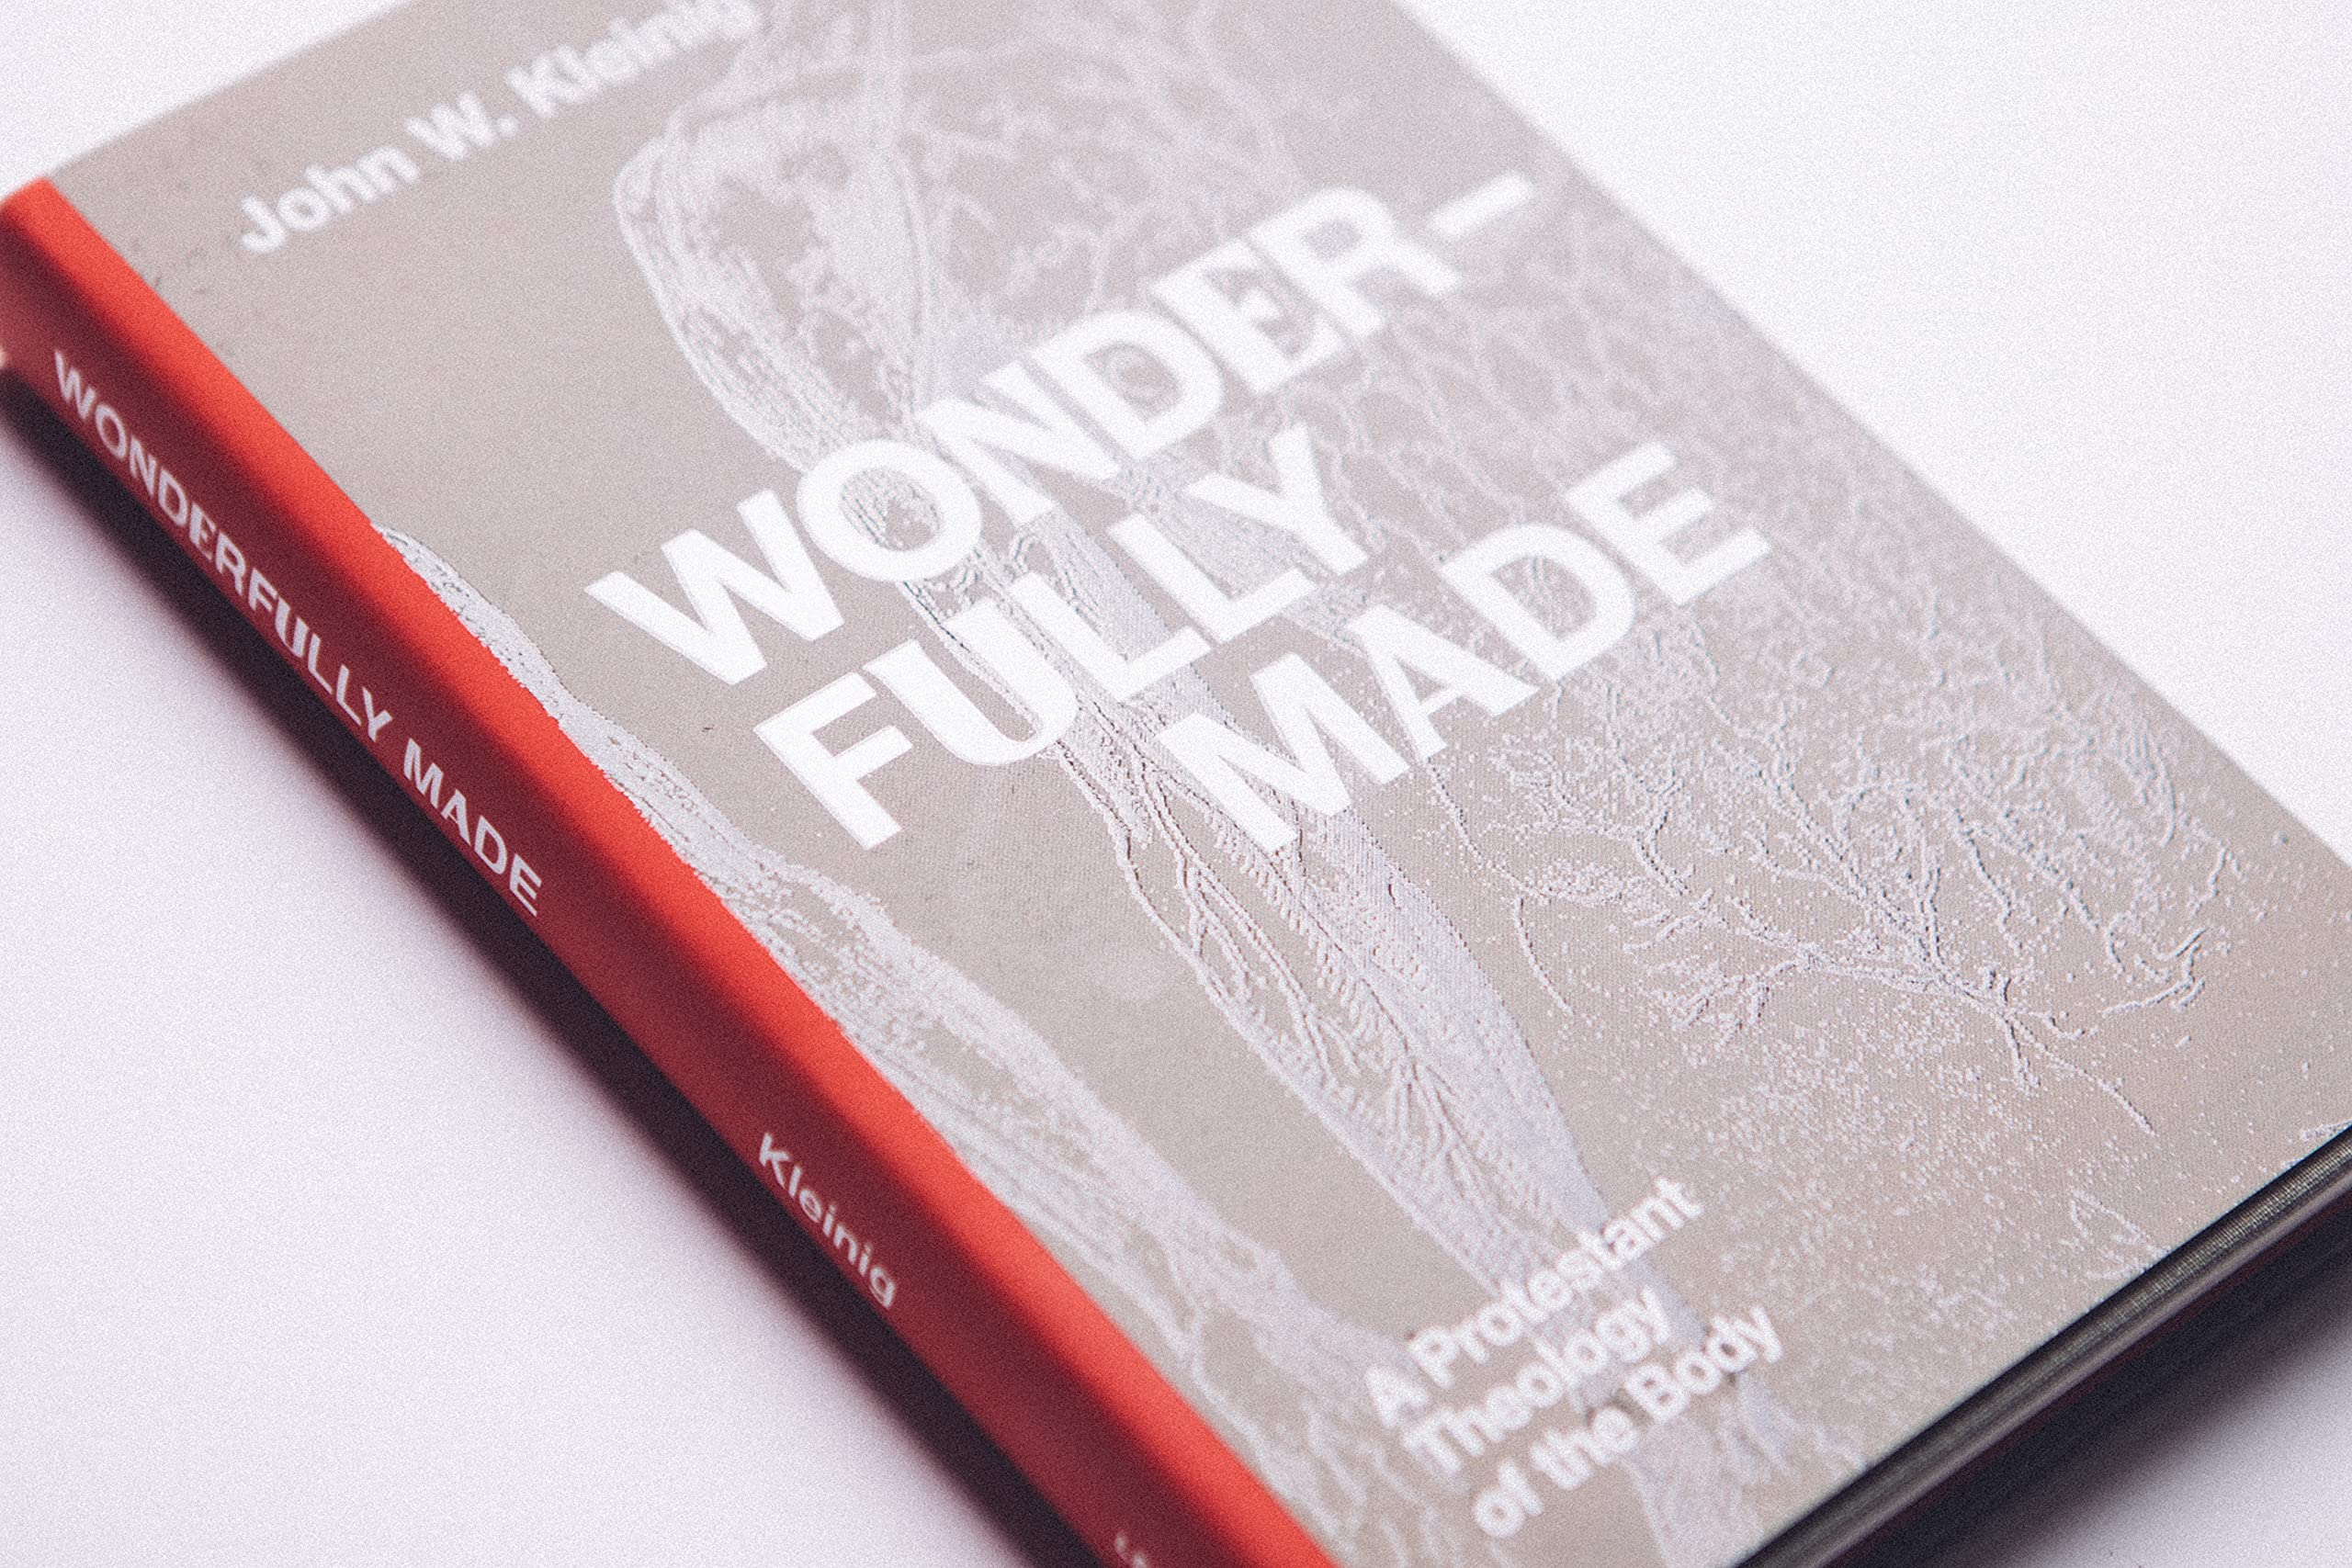 Wonderfully Made: A Protestant Theology of the Body